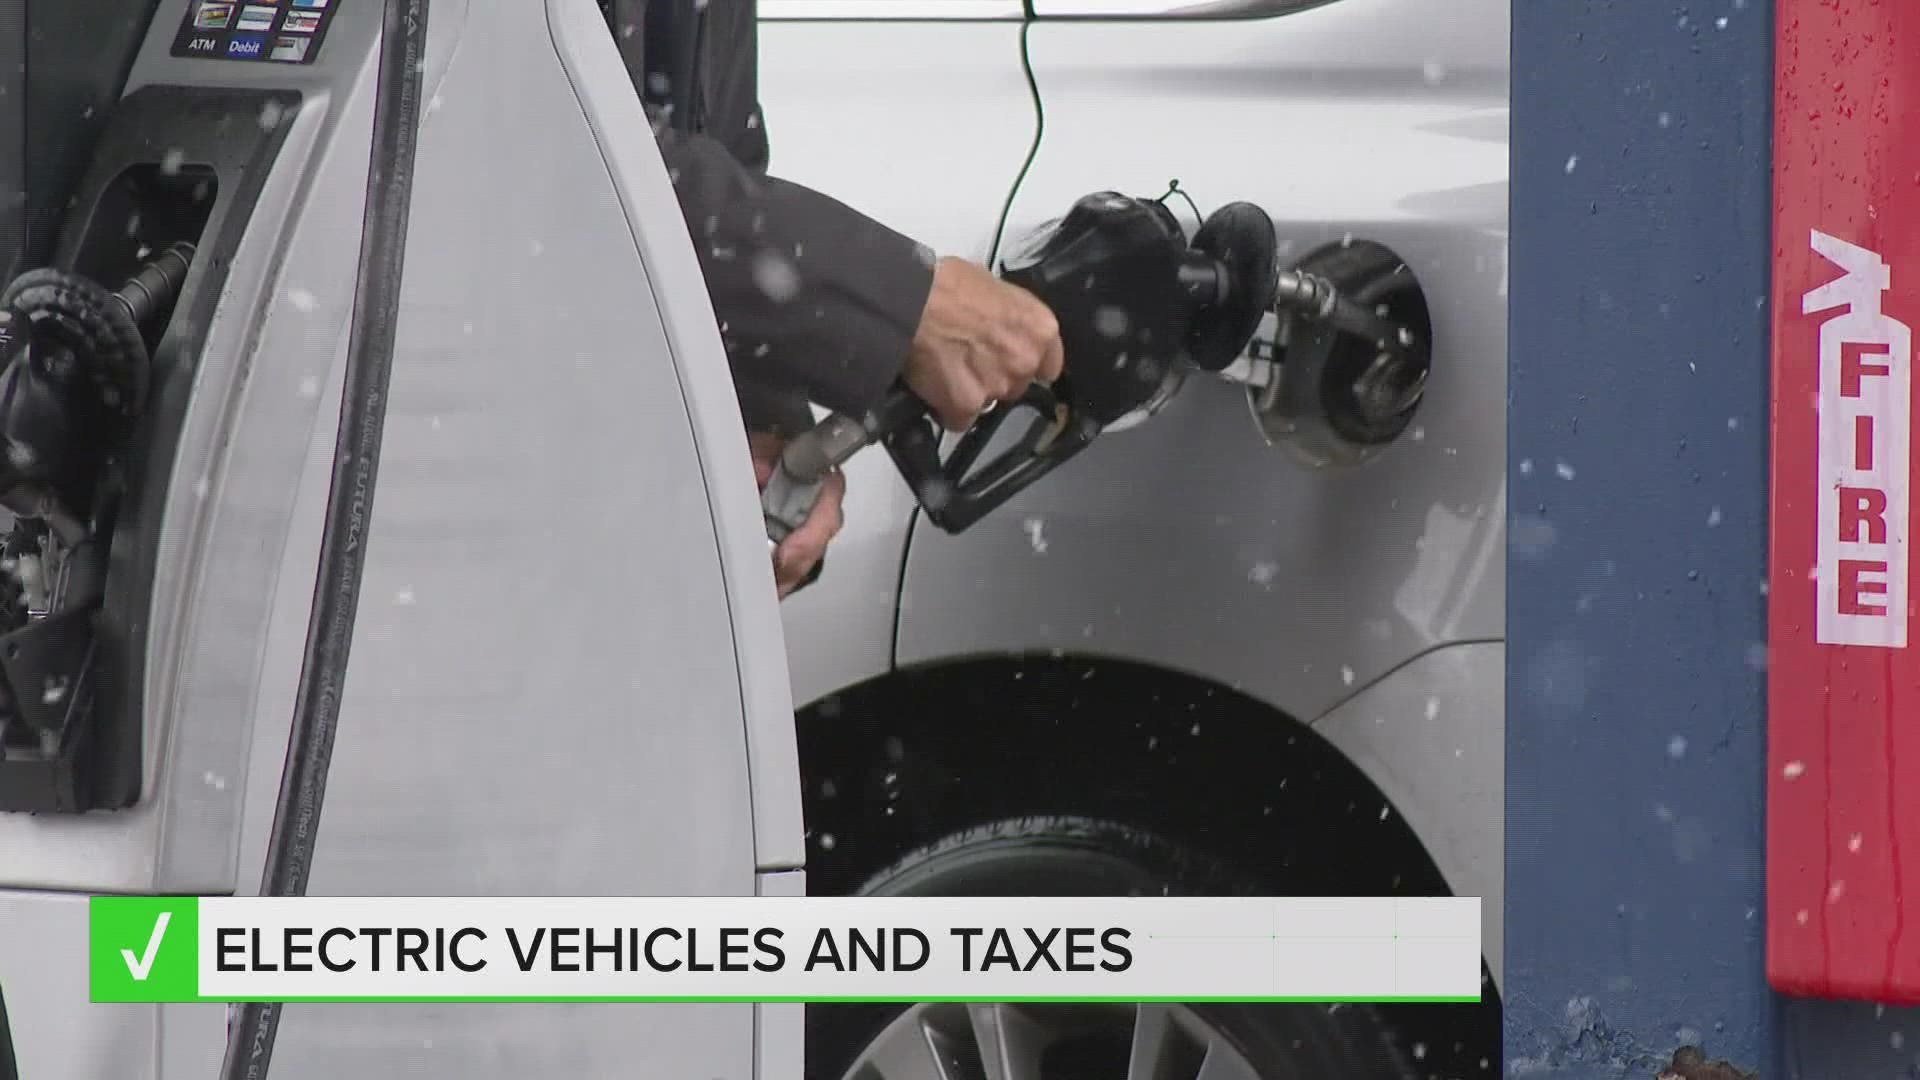 As prices at the pump remain sky high, some wonder whether electrical vehicle owners are paying their fair share of taxes used to maintain public roads.